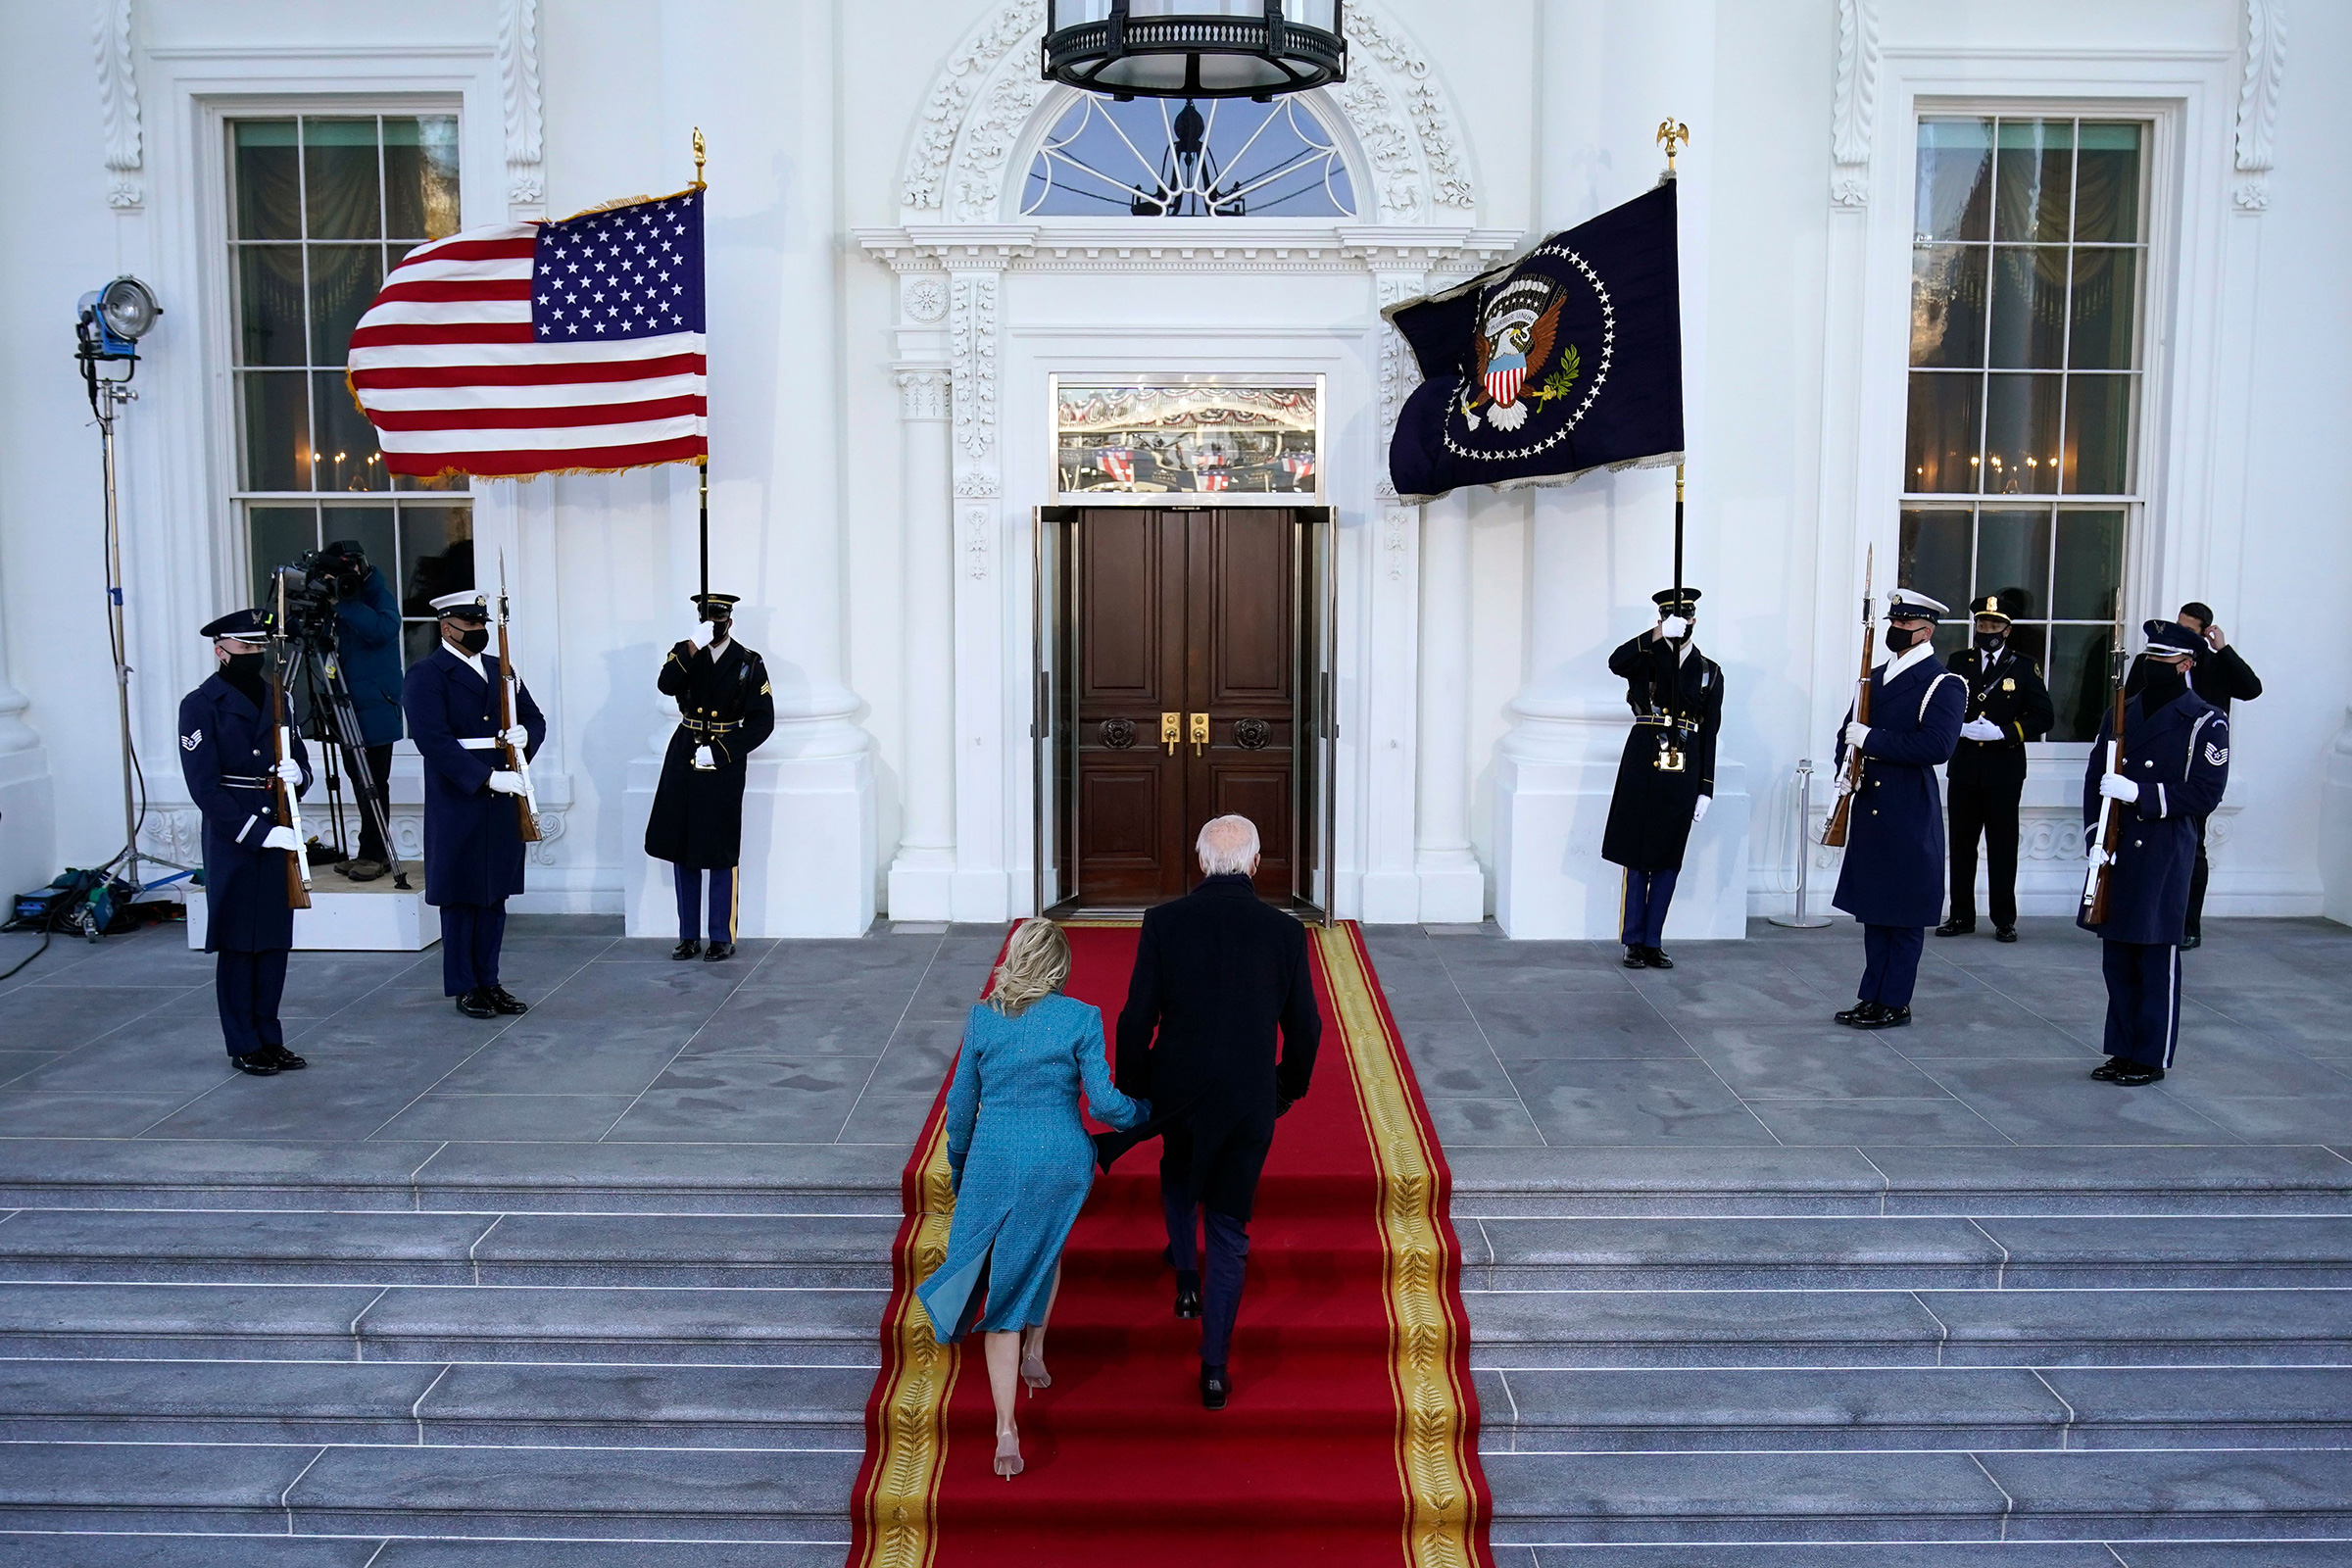 President Joe Biden and first lady Dr. Jill Biden walk up the stairs as they arrive at the North Portico of the White House. (Shutterstock)